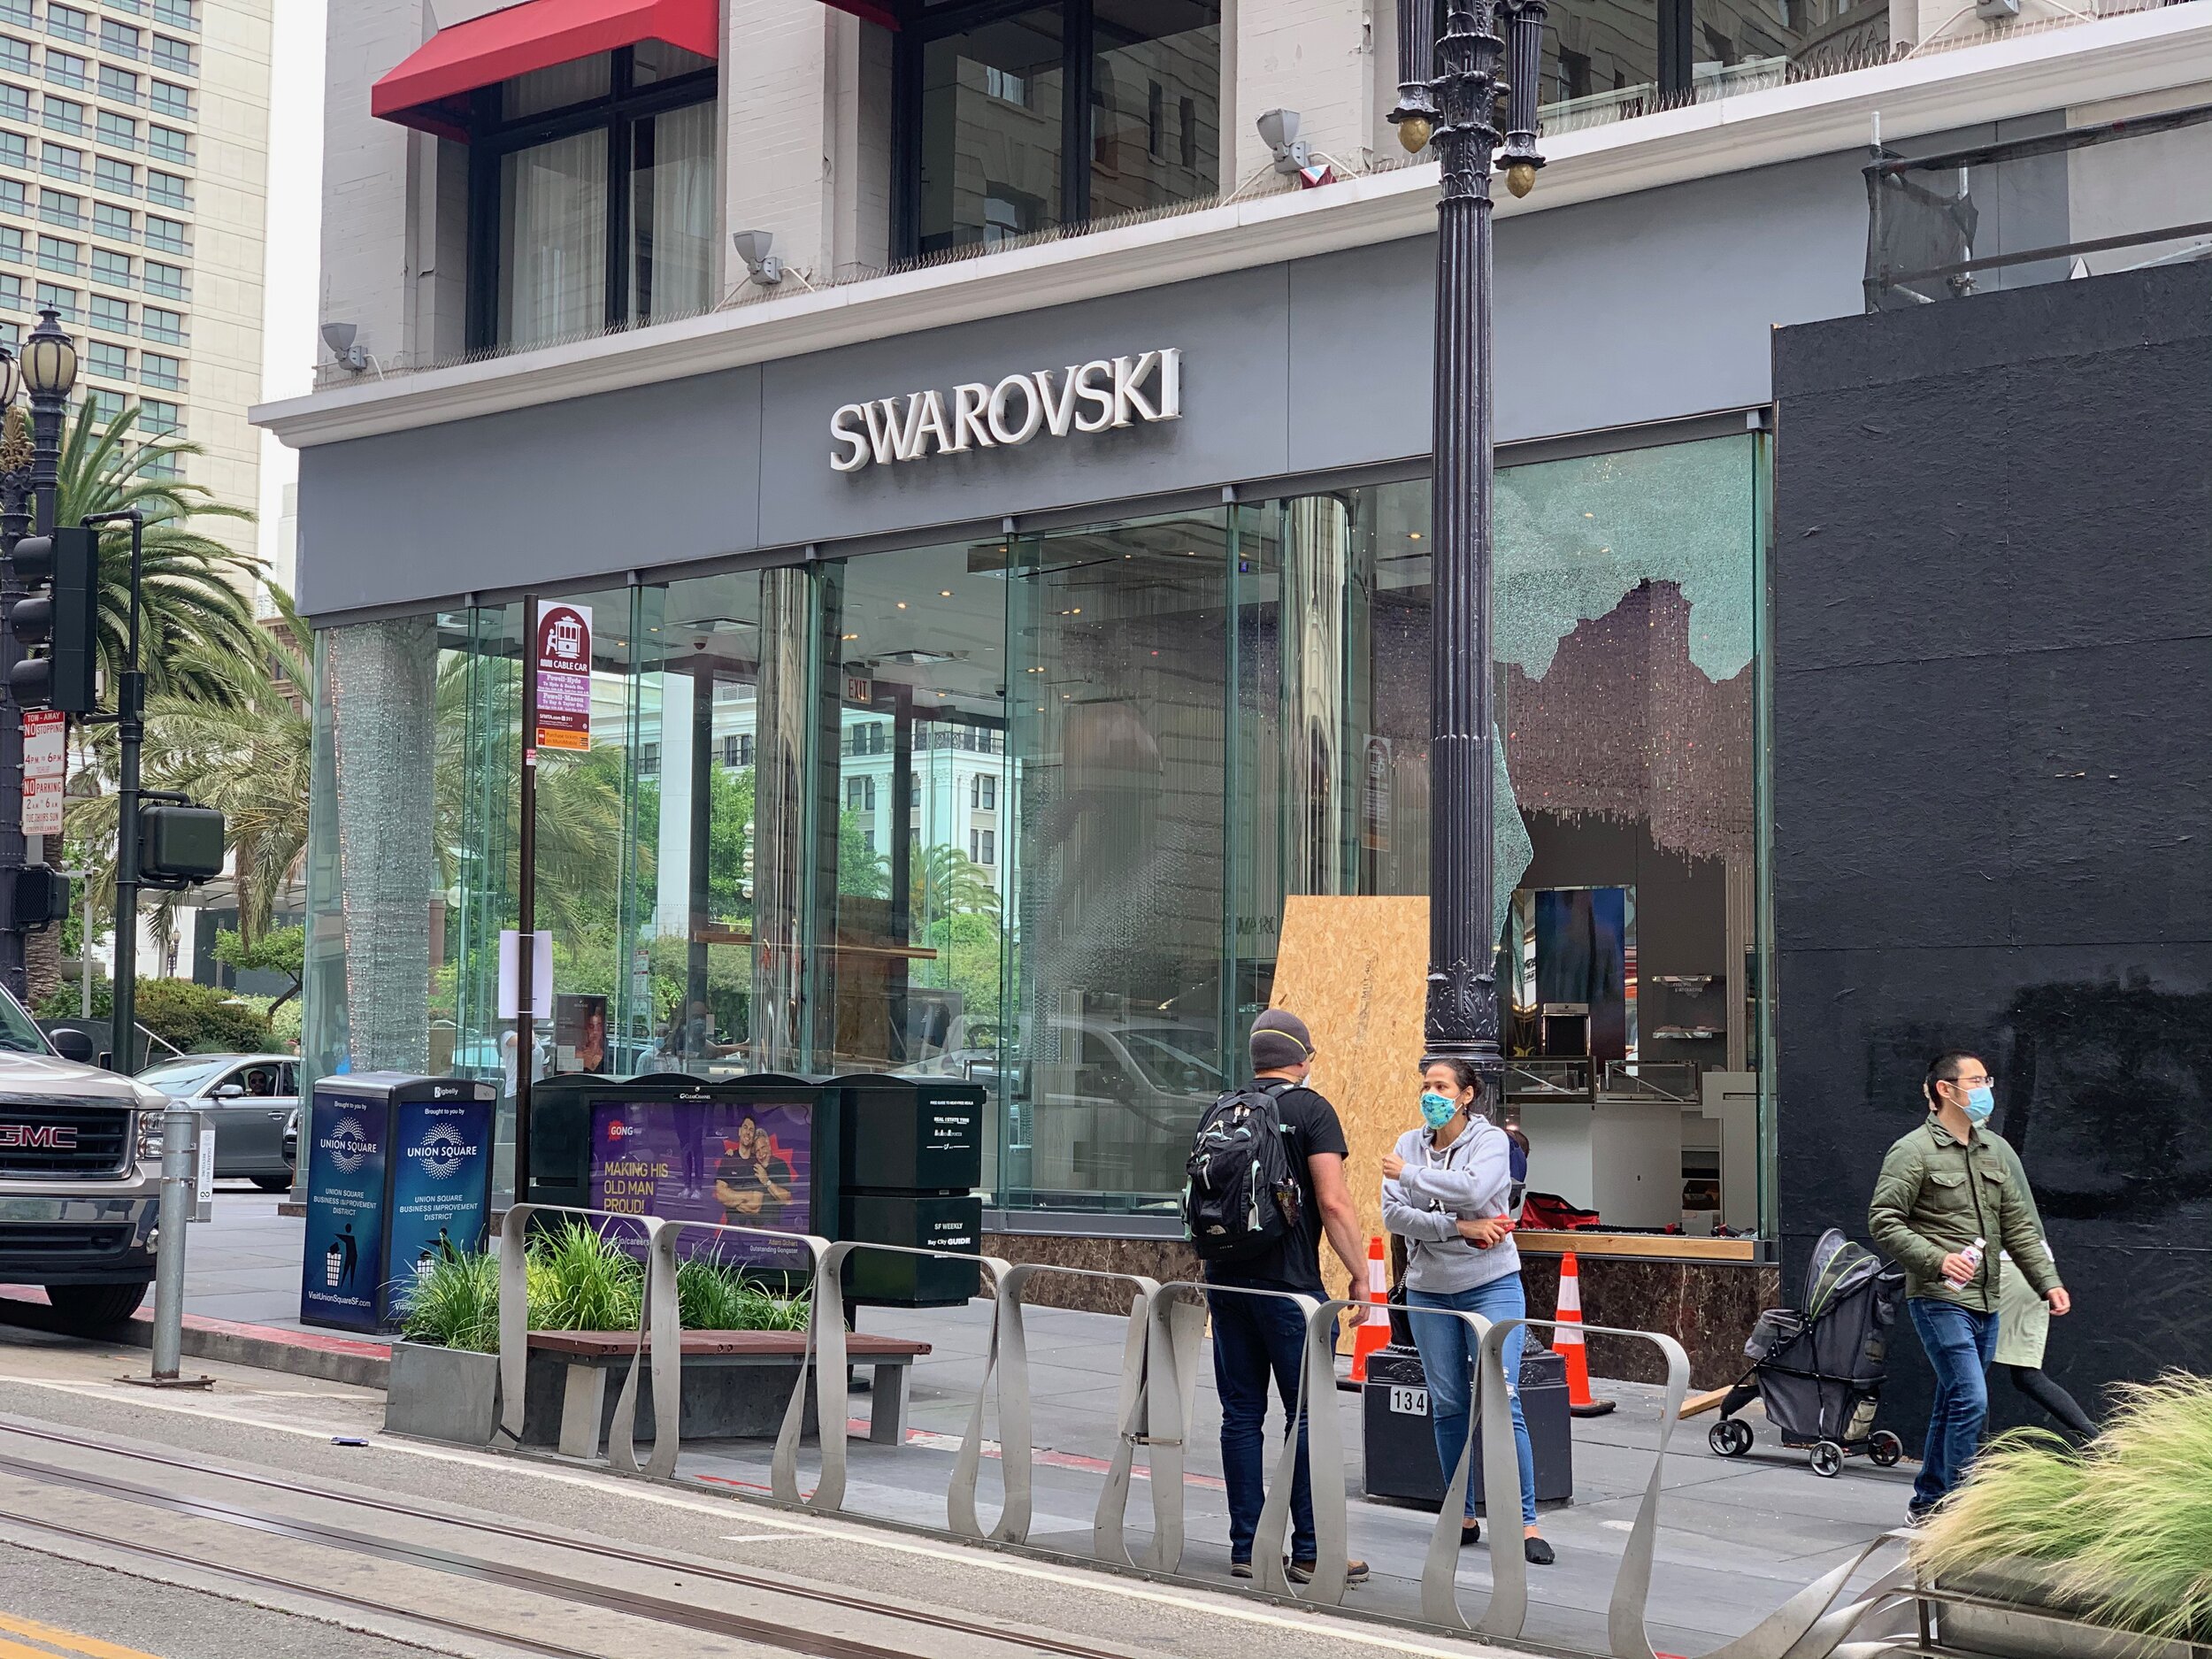  Swarovski morning after looting at Union Square.  June 31, 2020 